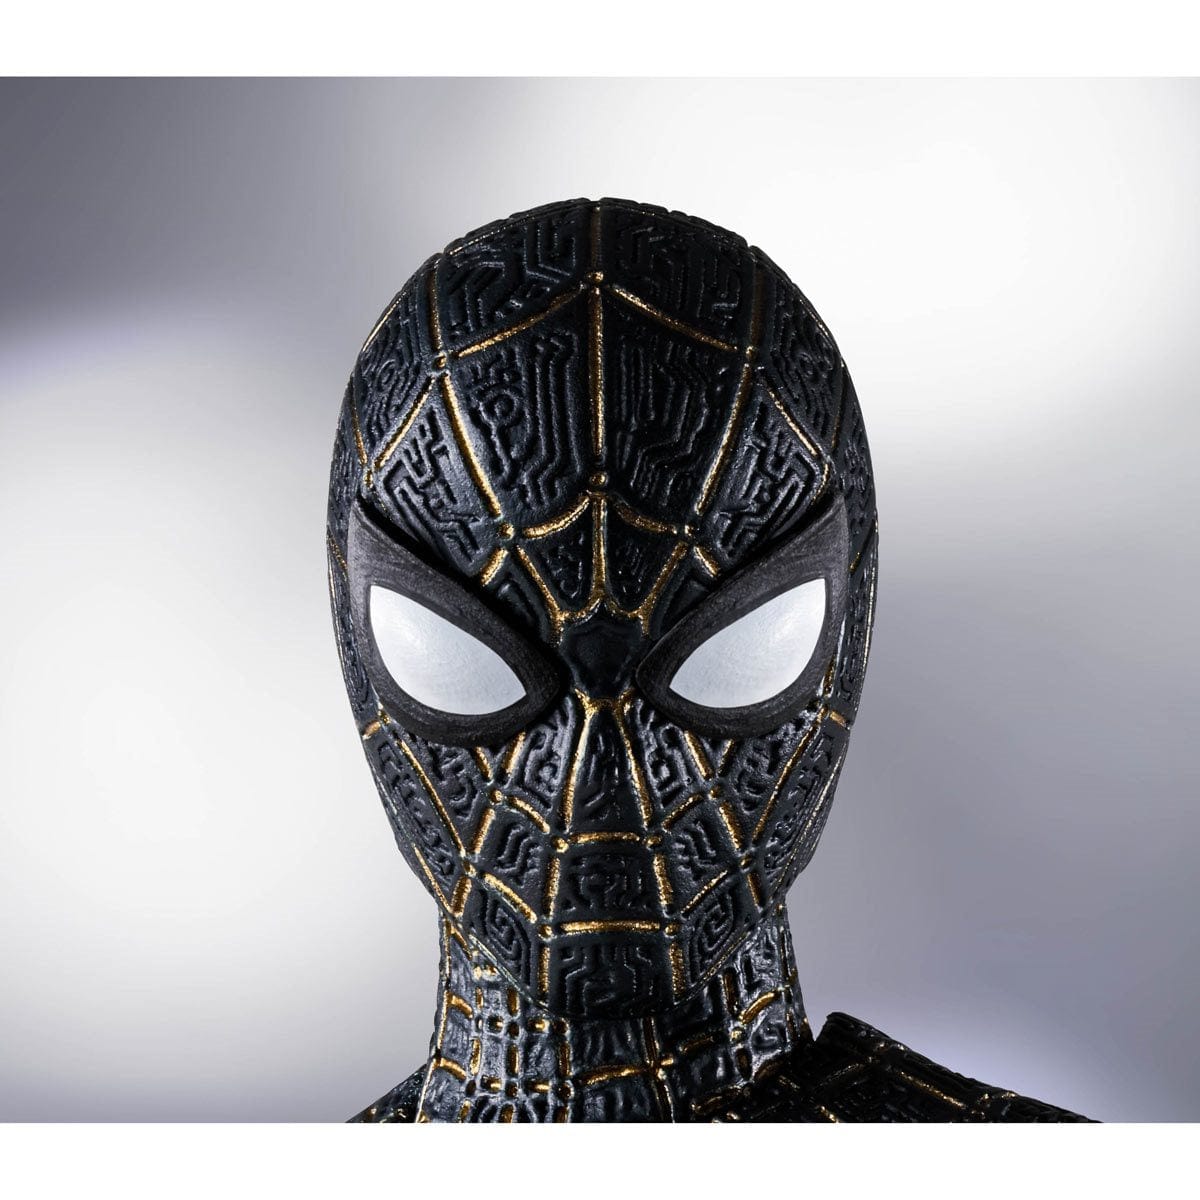 Bandai S.H.Figuarts SPIDER MAN NO WAY HOME Black and Gold Suit  toy action figure for kids and collectors